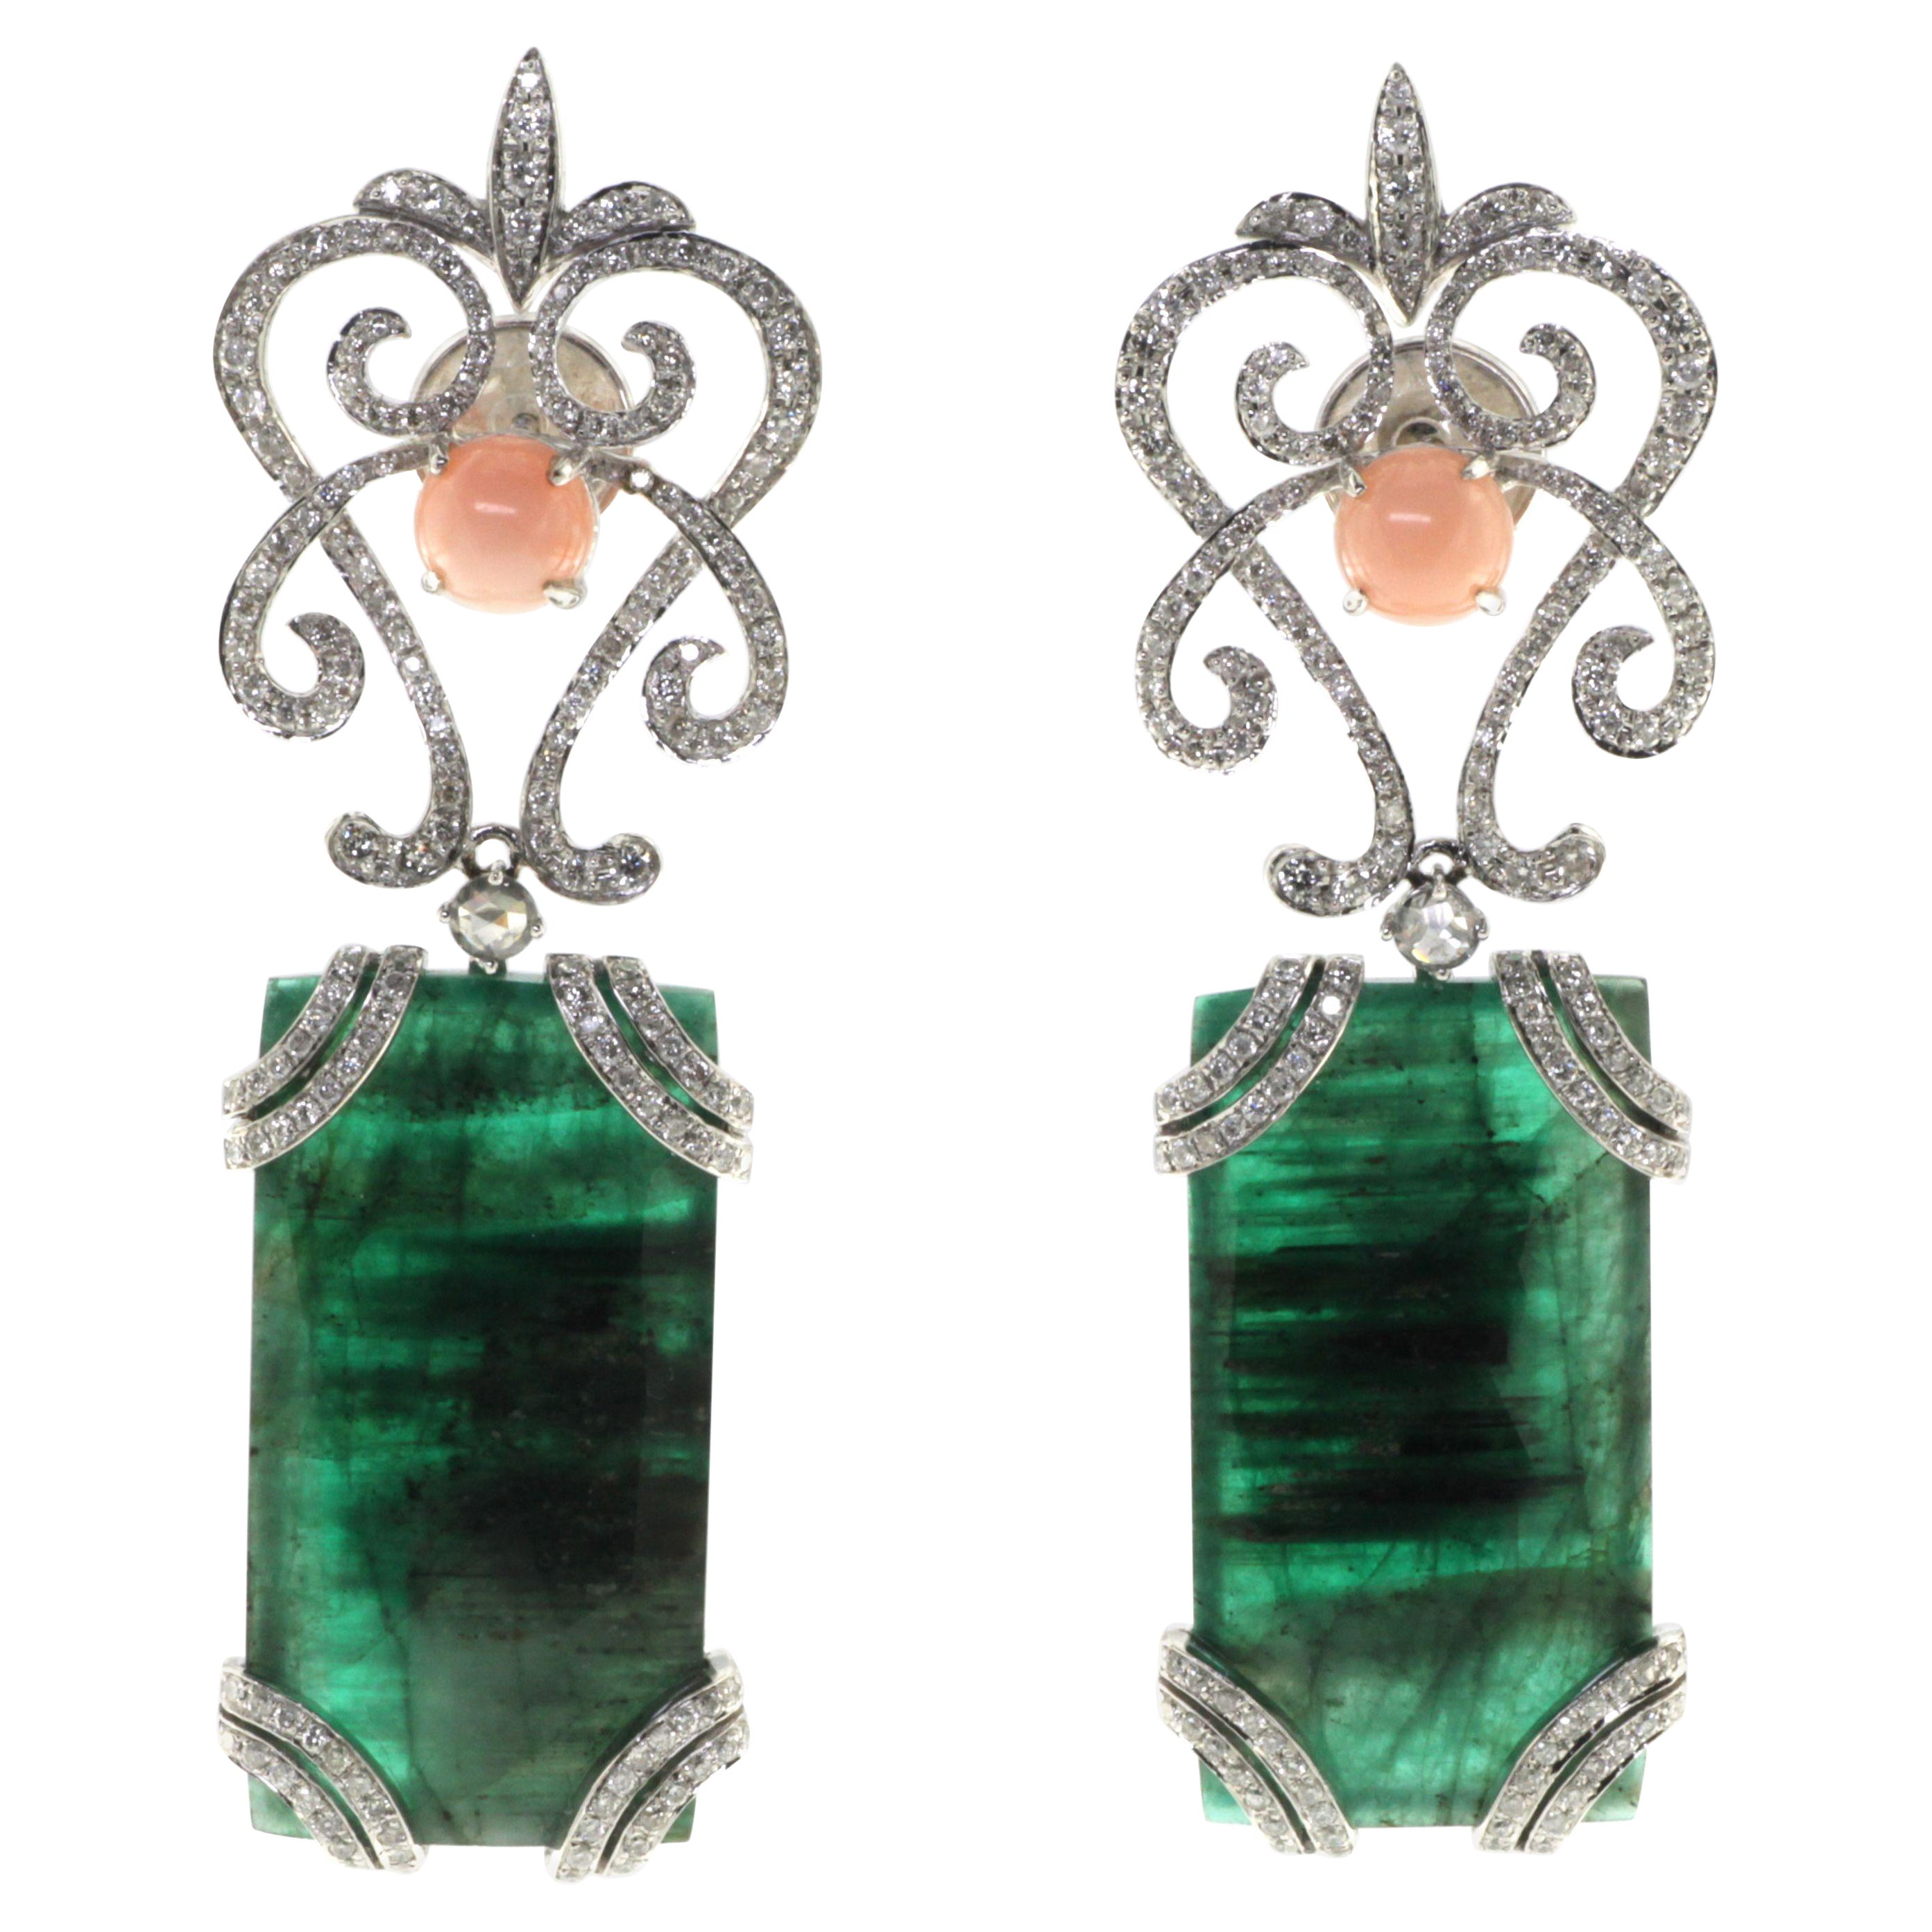  Vintage 25.07Ct Emerald Dangle Earring Diamonds Coral  And 18 Karat White Gold  For Sale